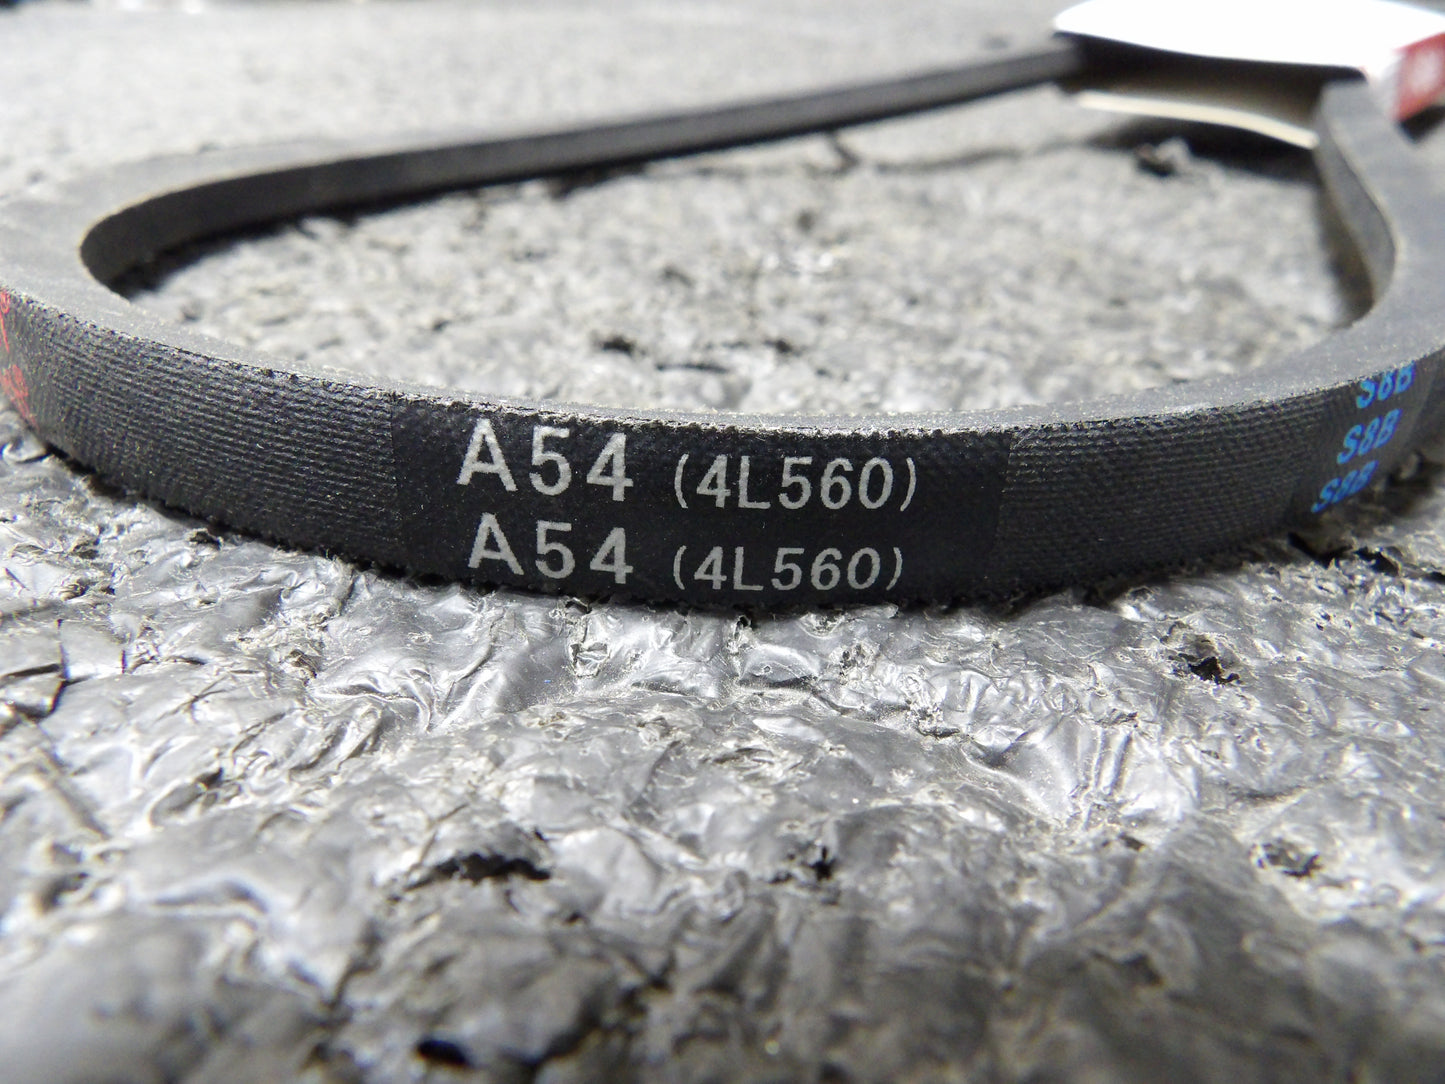 Supco V-Belt: 4L, 4L560, 1 Ribs, 56 in Outside Lg, 1/2 in Top Wd, 5/16 in Thick (CR00783-WTA22)